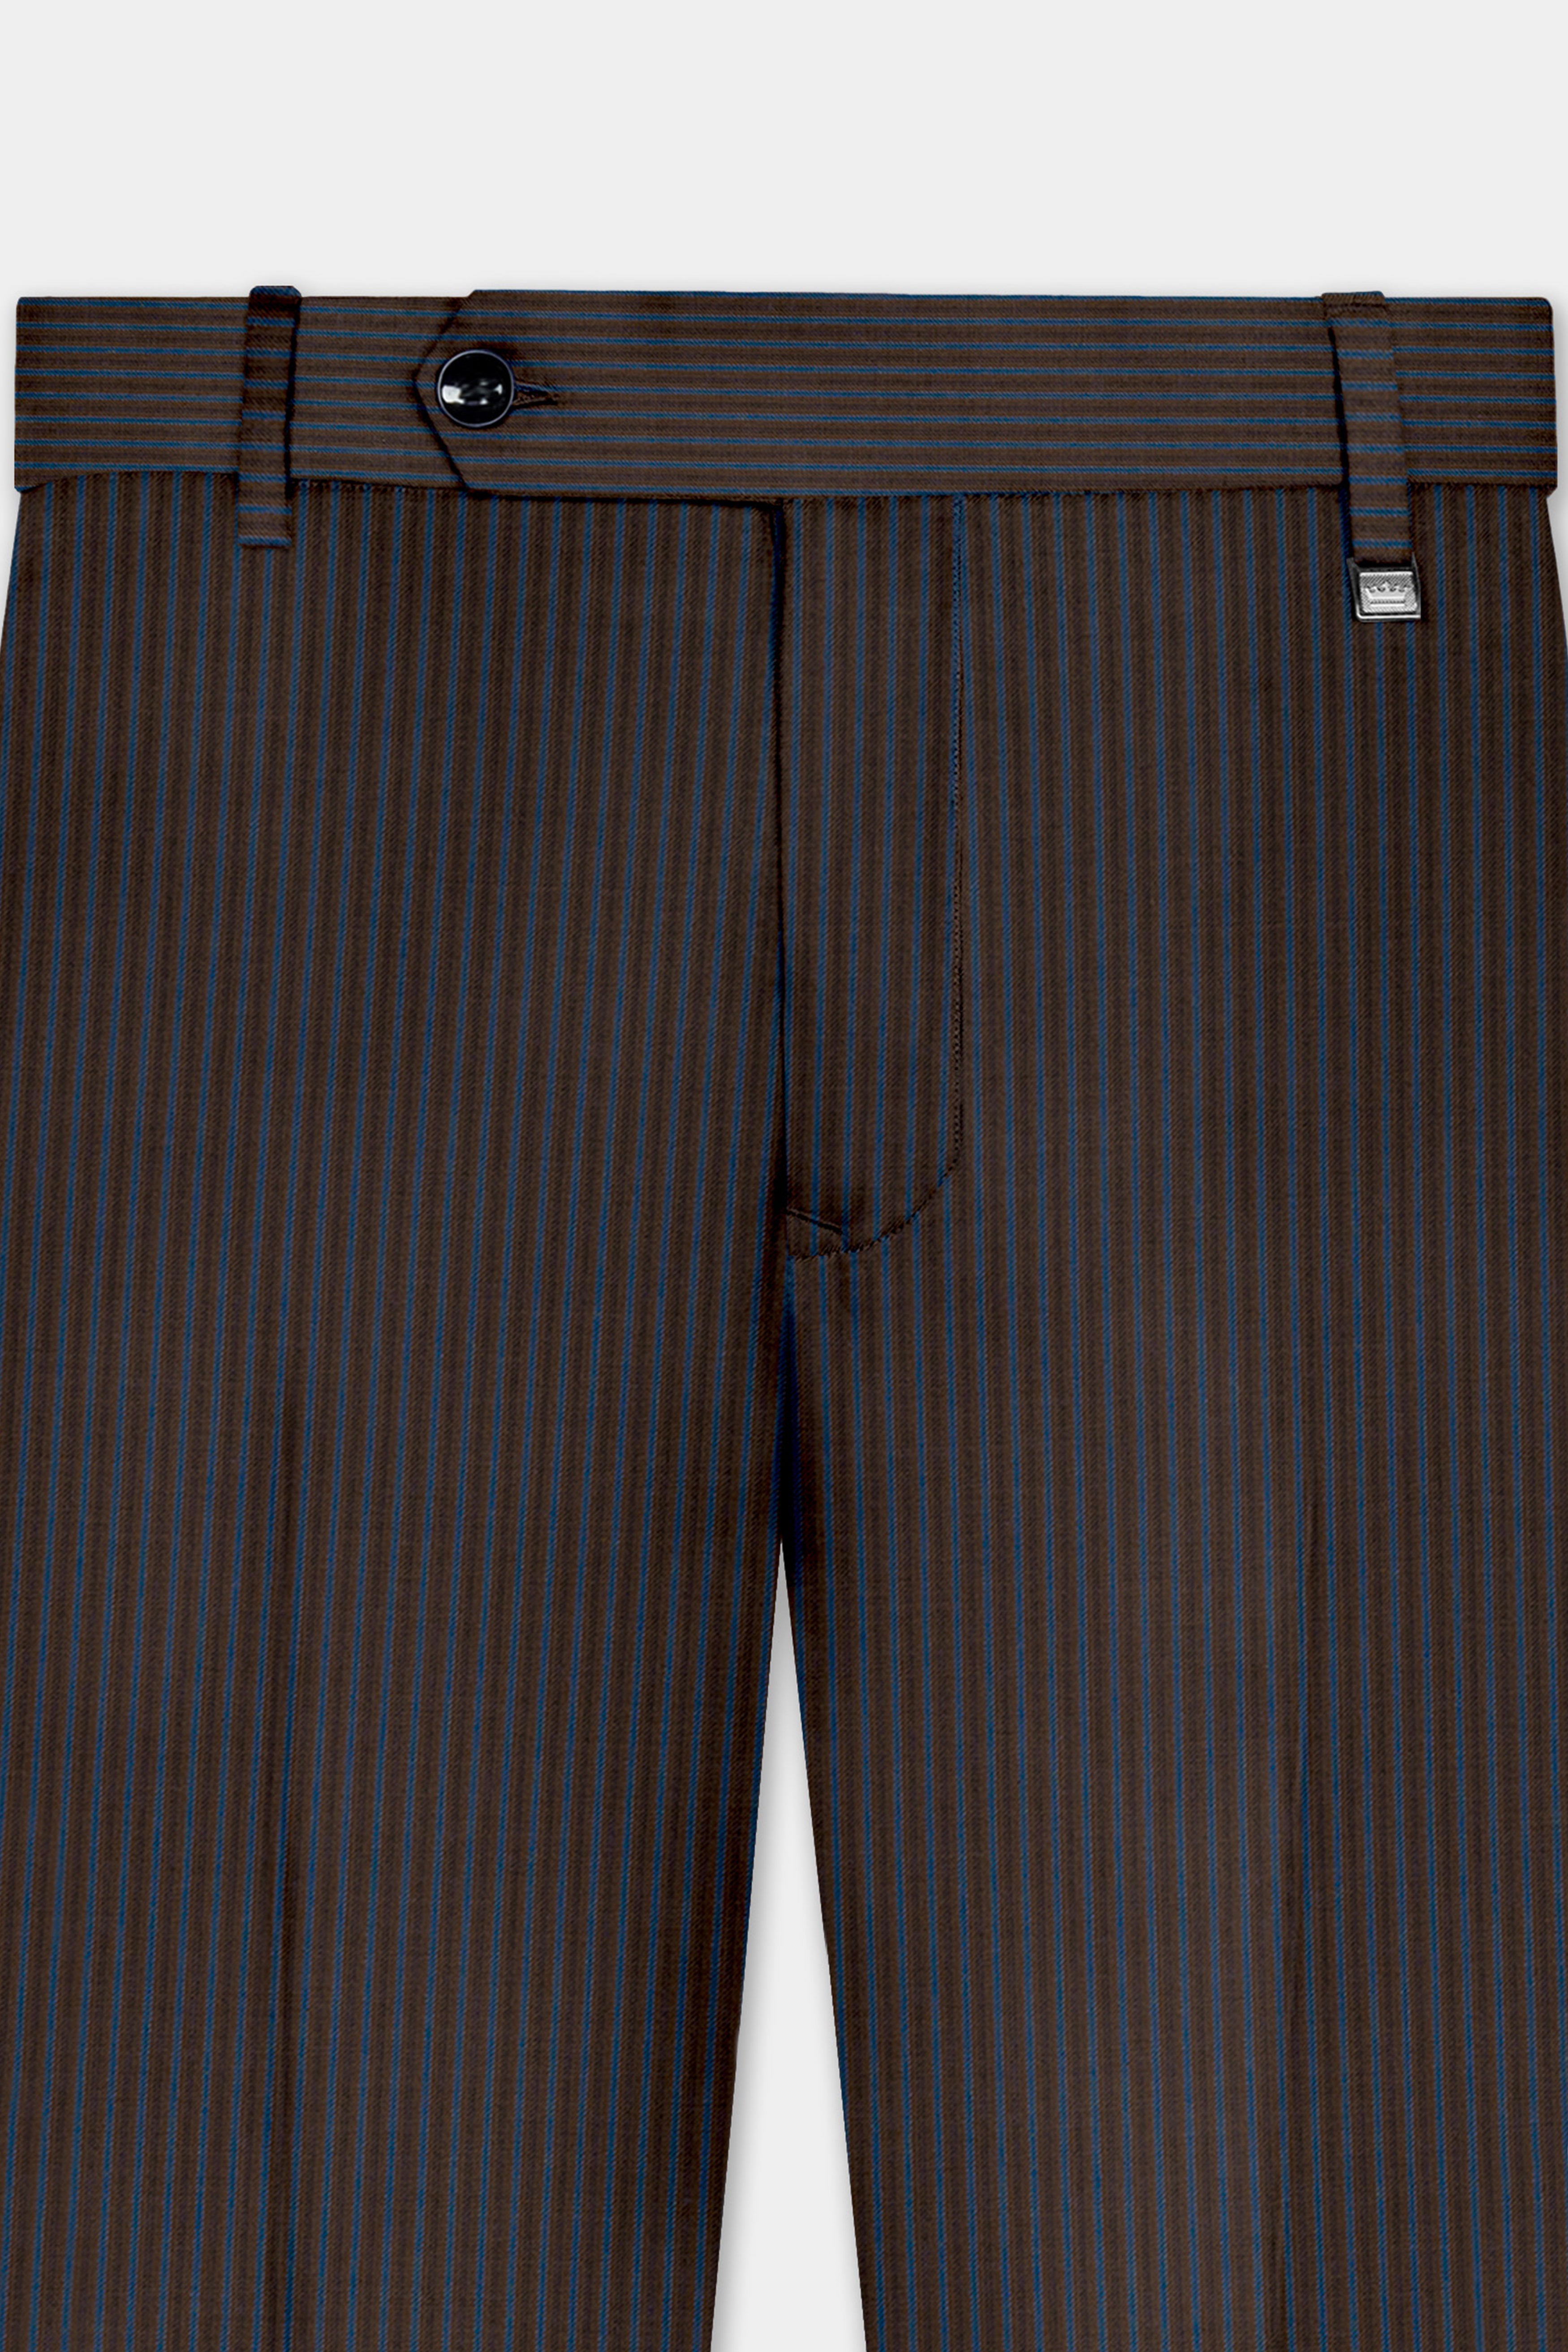 Eclipse Brown with Kashmir Blue Striped Wool Blend Pant